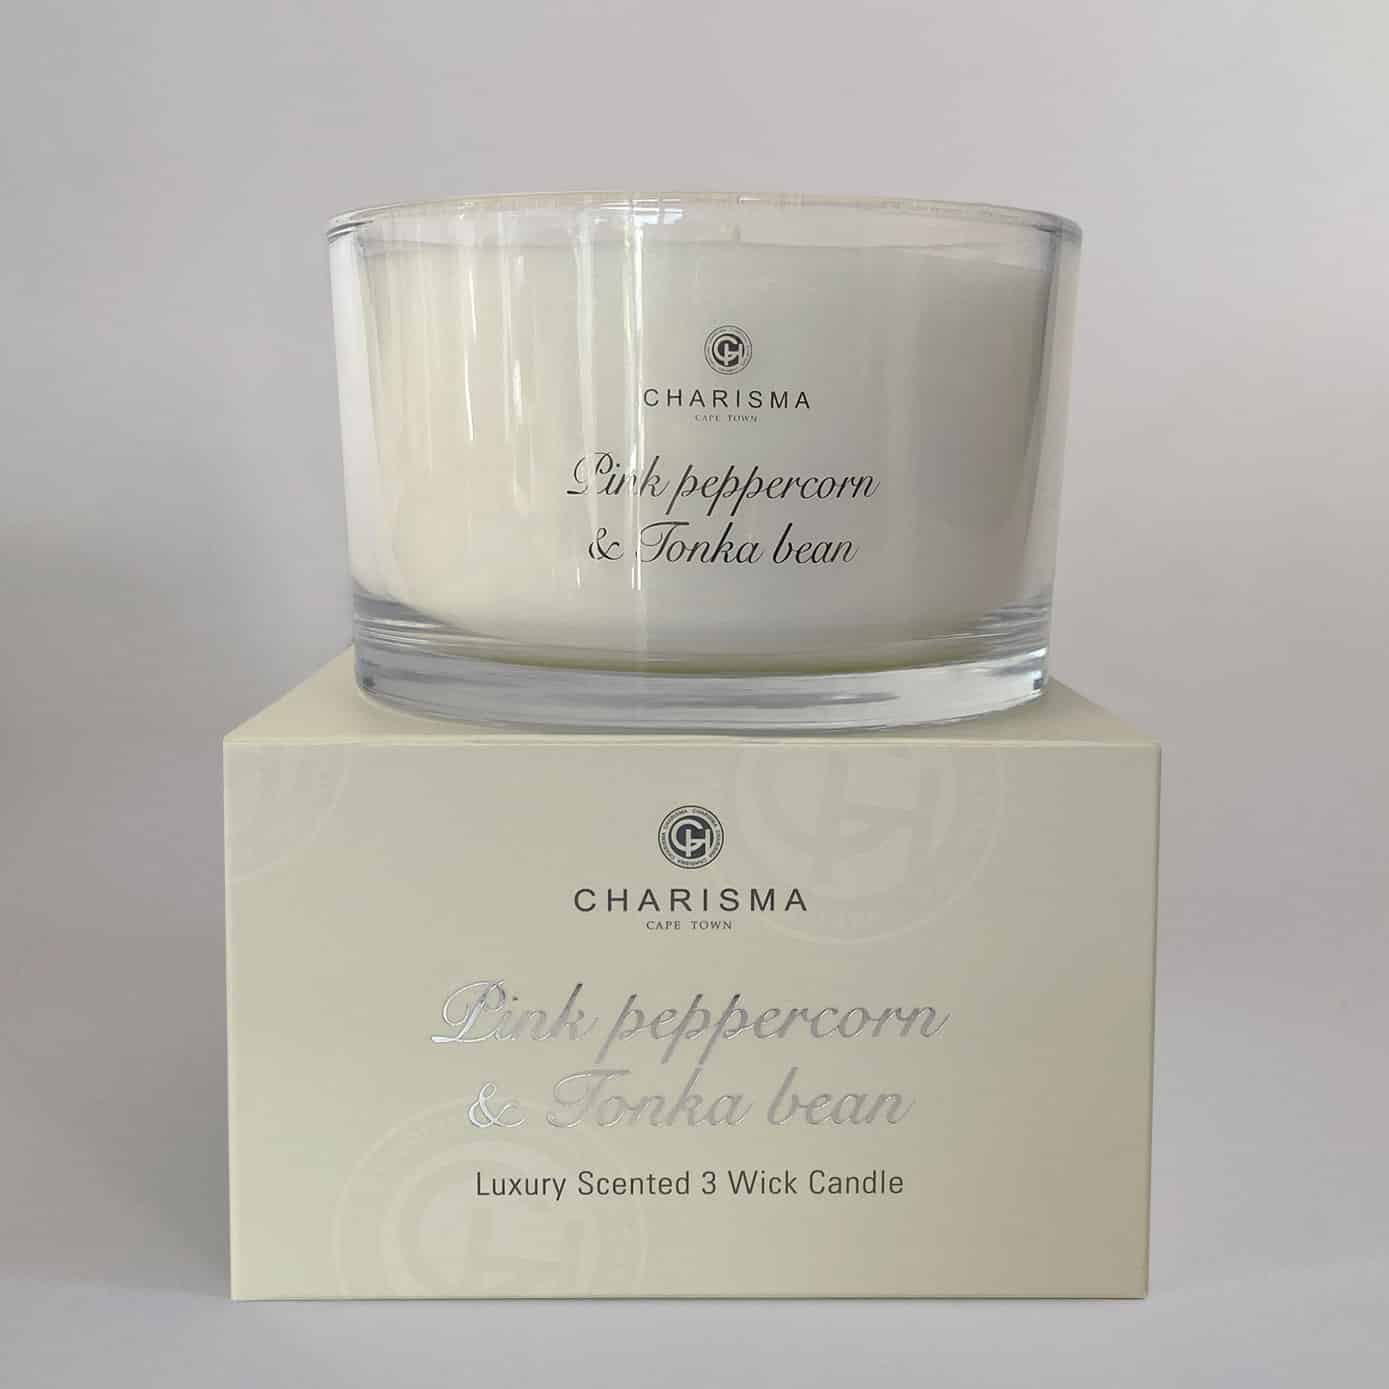 Charisma Pink Peppercorn 3 Wick Candle 500g